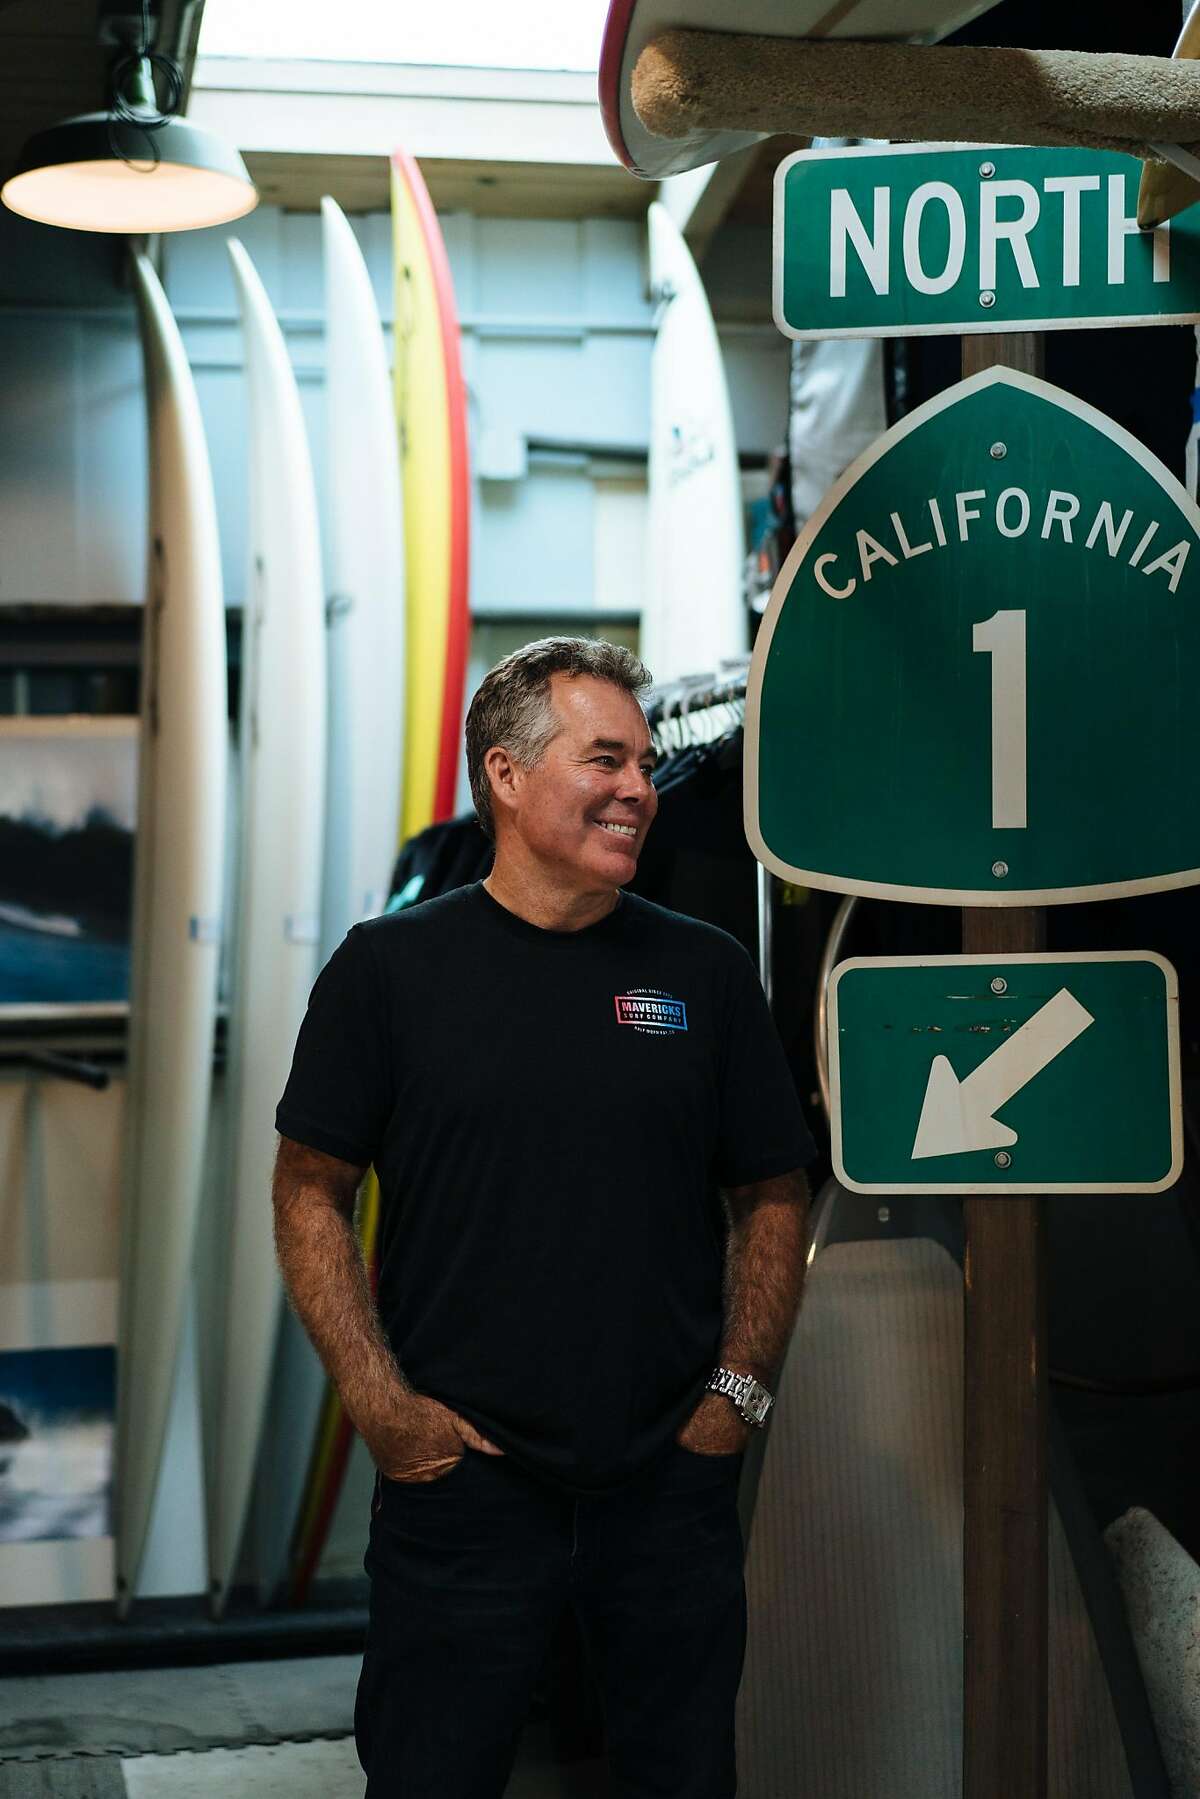 Jeff Clark poses for a portrait at his store Mavericks Surf Shop in Half Moon Bay, Calif., on Sunday, July 1, 2018